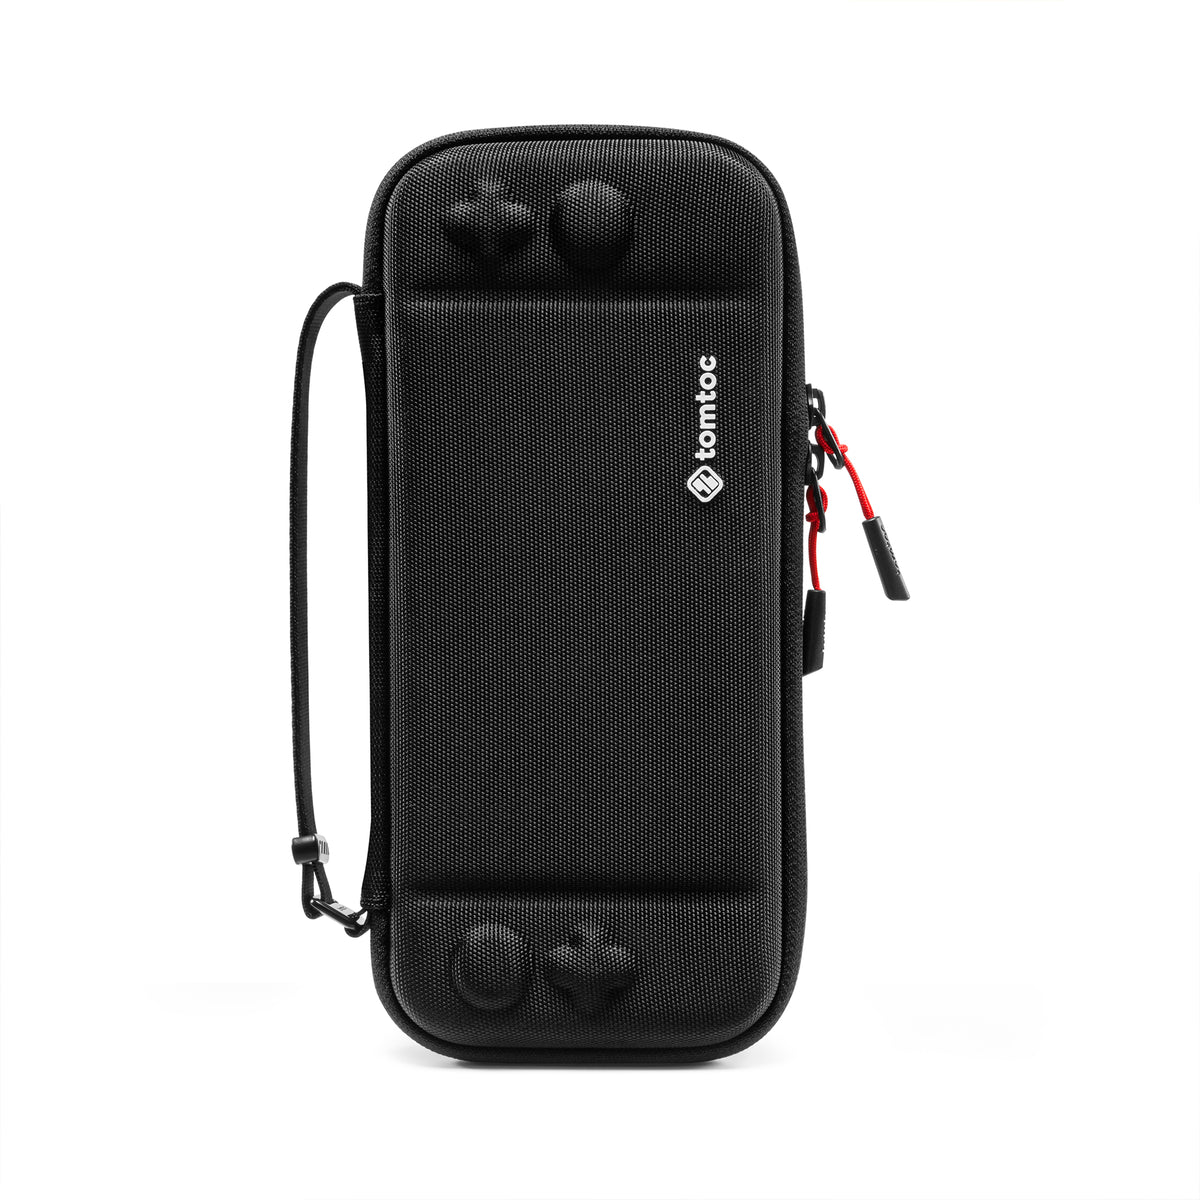 tomtoc Slim Protective Carrying Case with 10 Game Cartridges - Nintendo Switch & OLED Model - Black